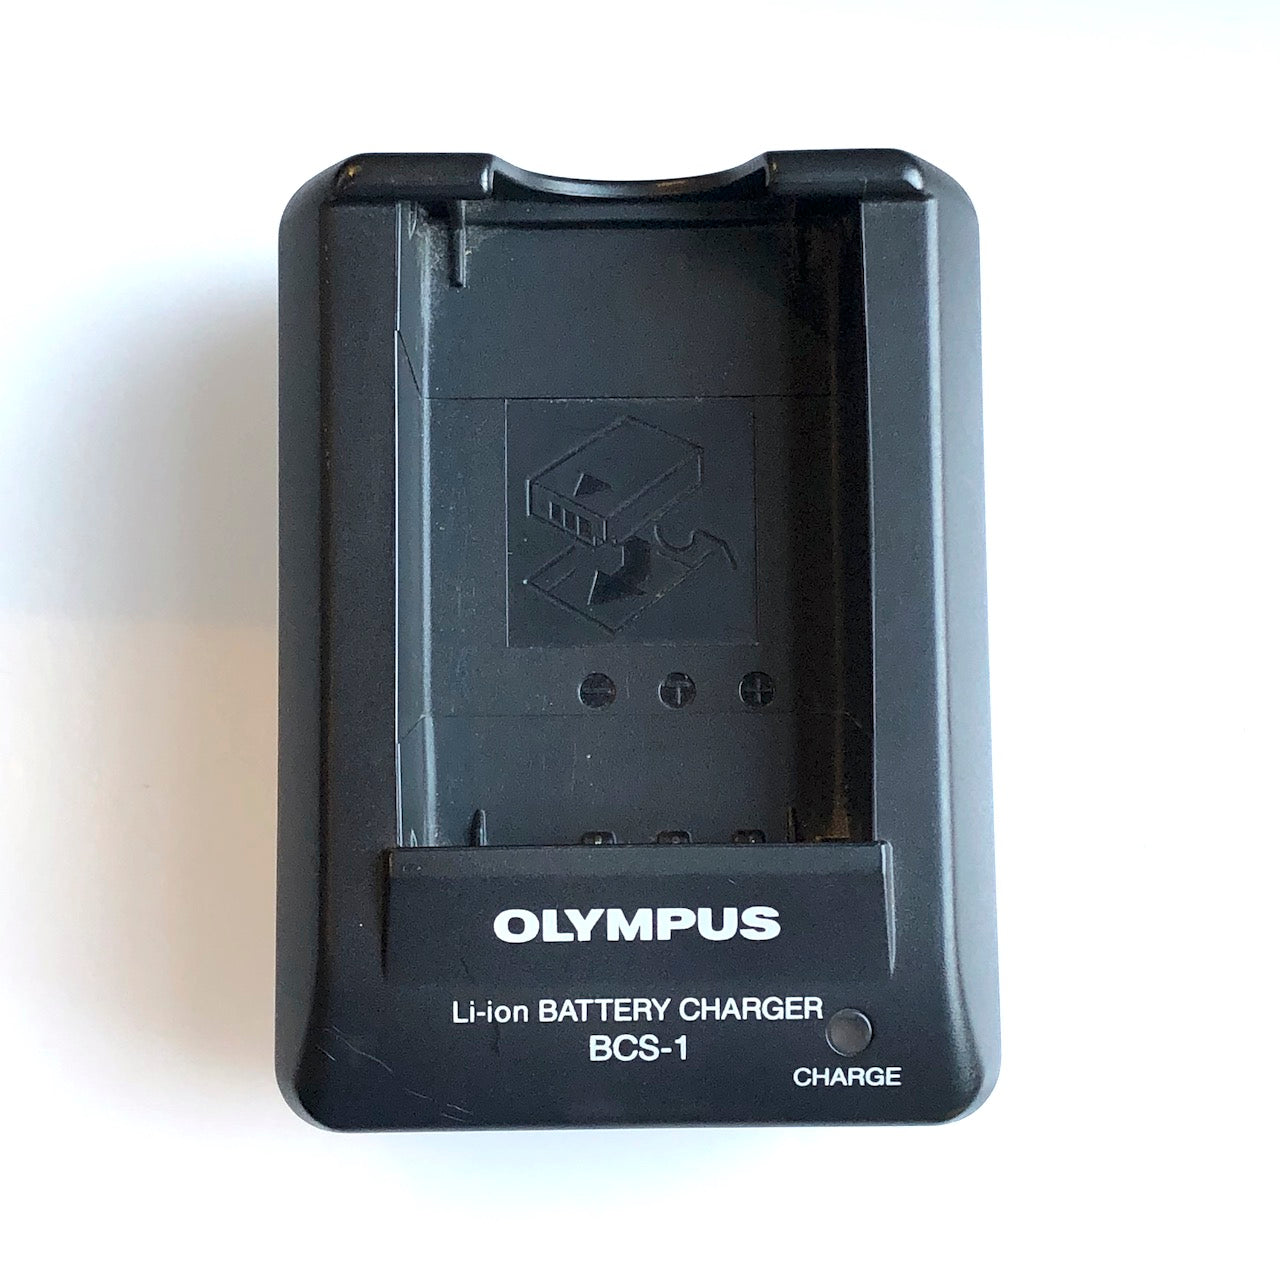 Olympus Battery Chargers